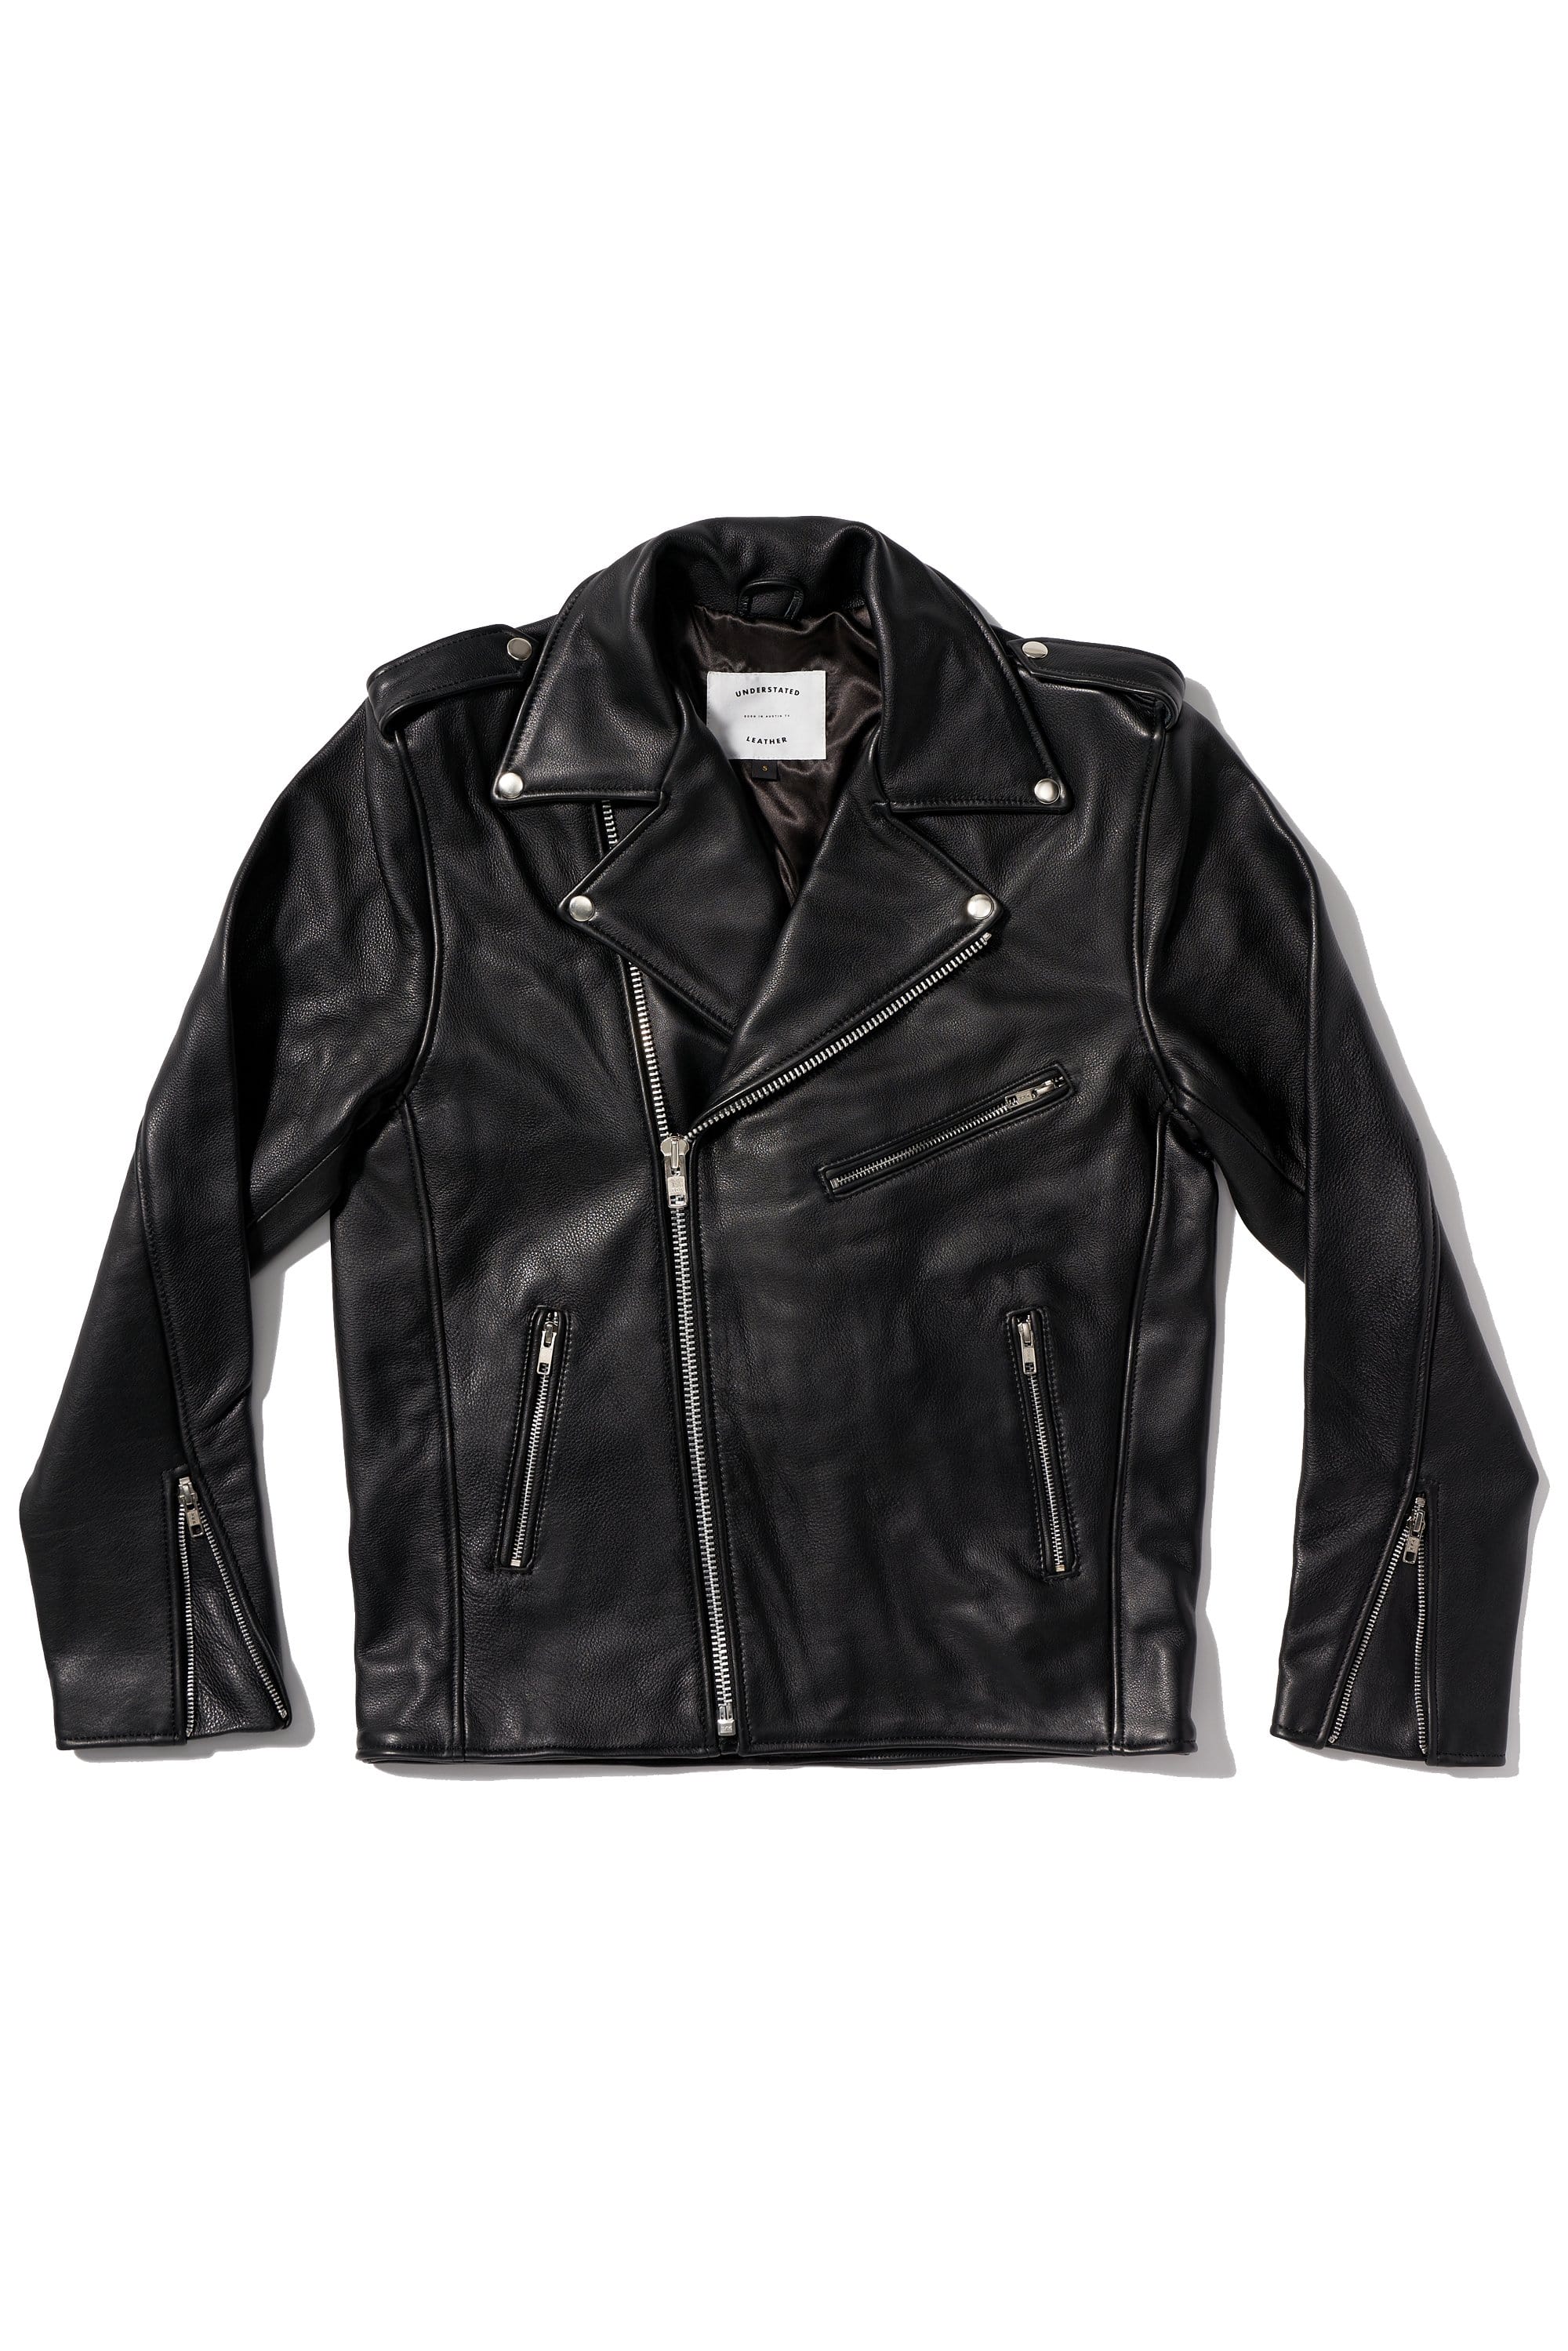 MENS EASY RIDER — Understated Leather